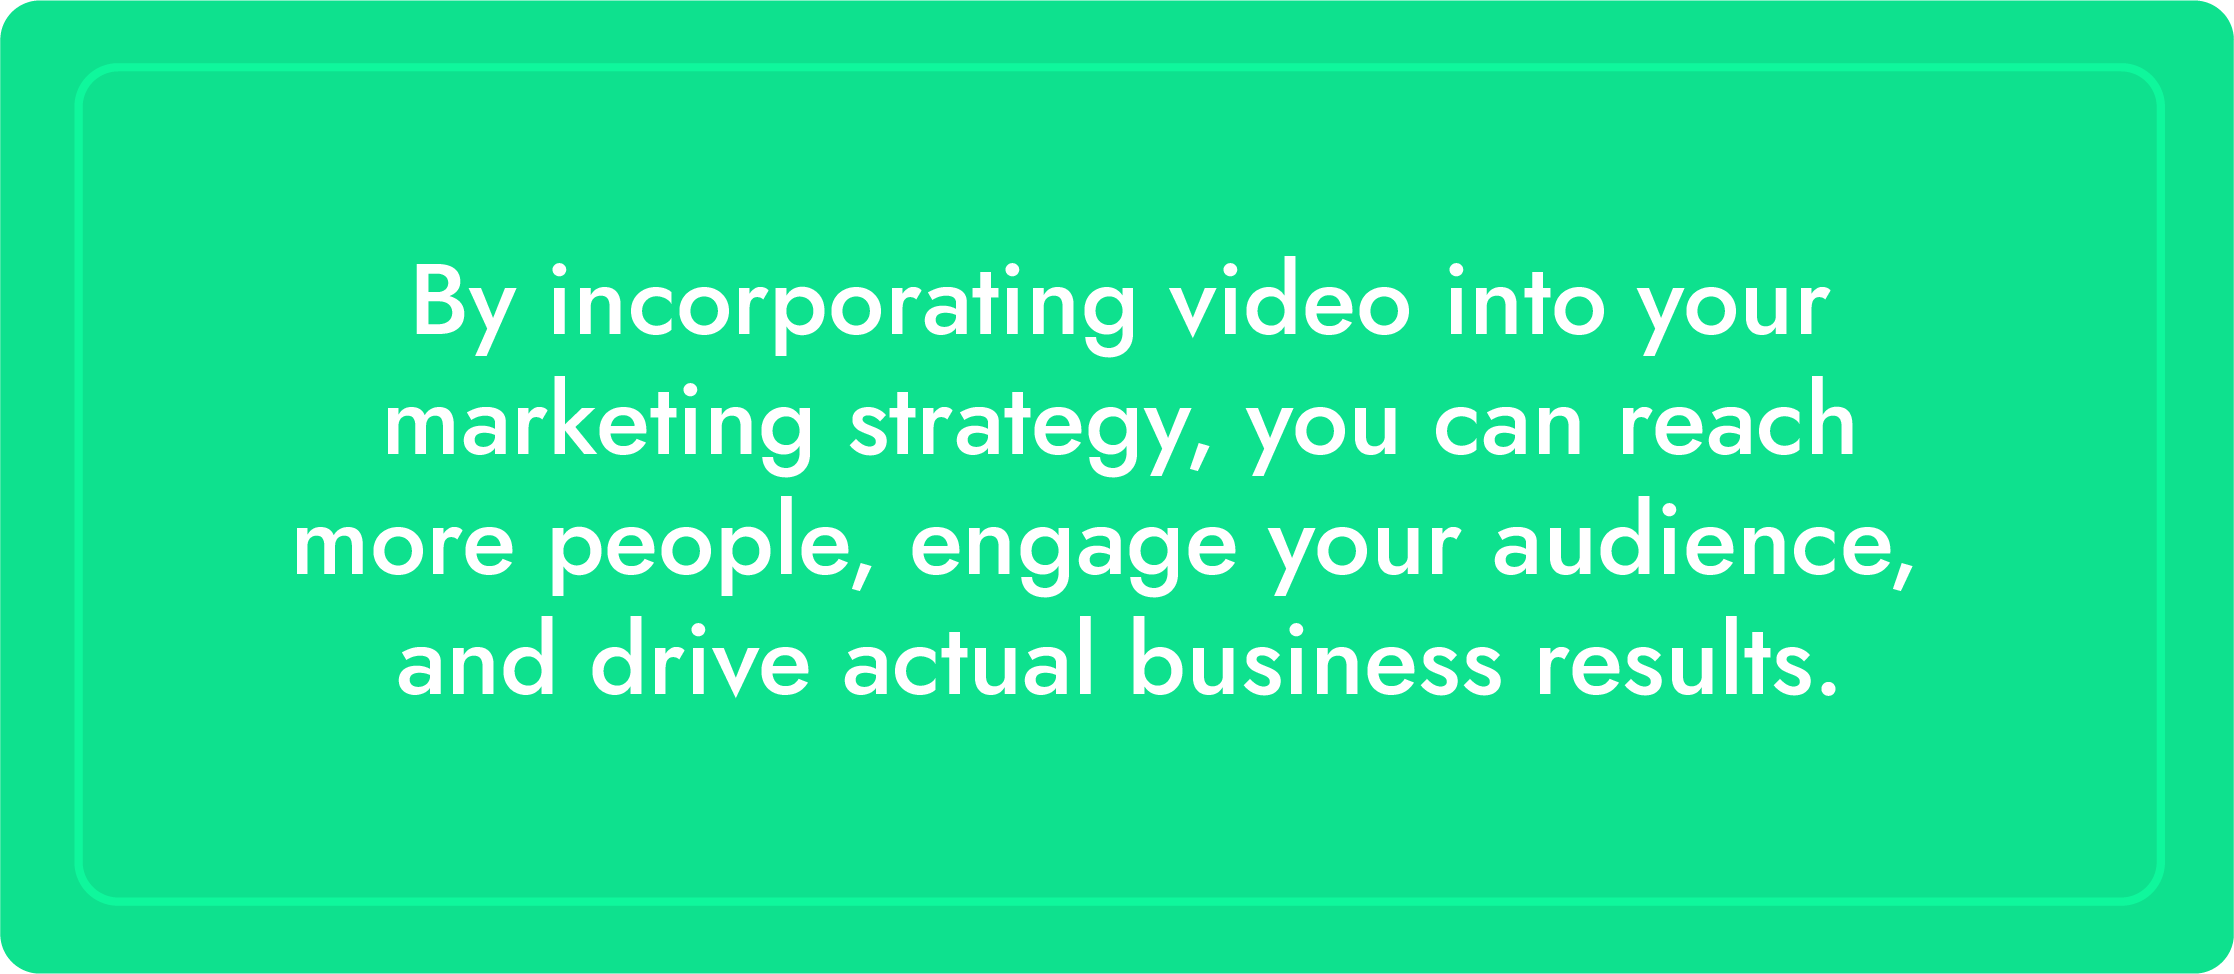 By incorporating video into your marketing strategy, you can reach more people, engage your audience, and drive actual business results.